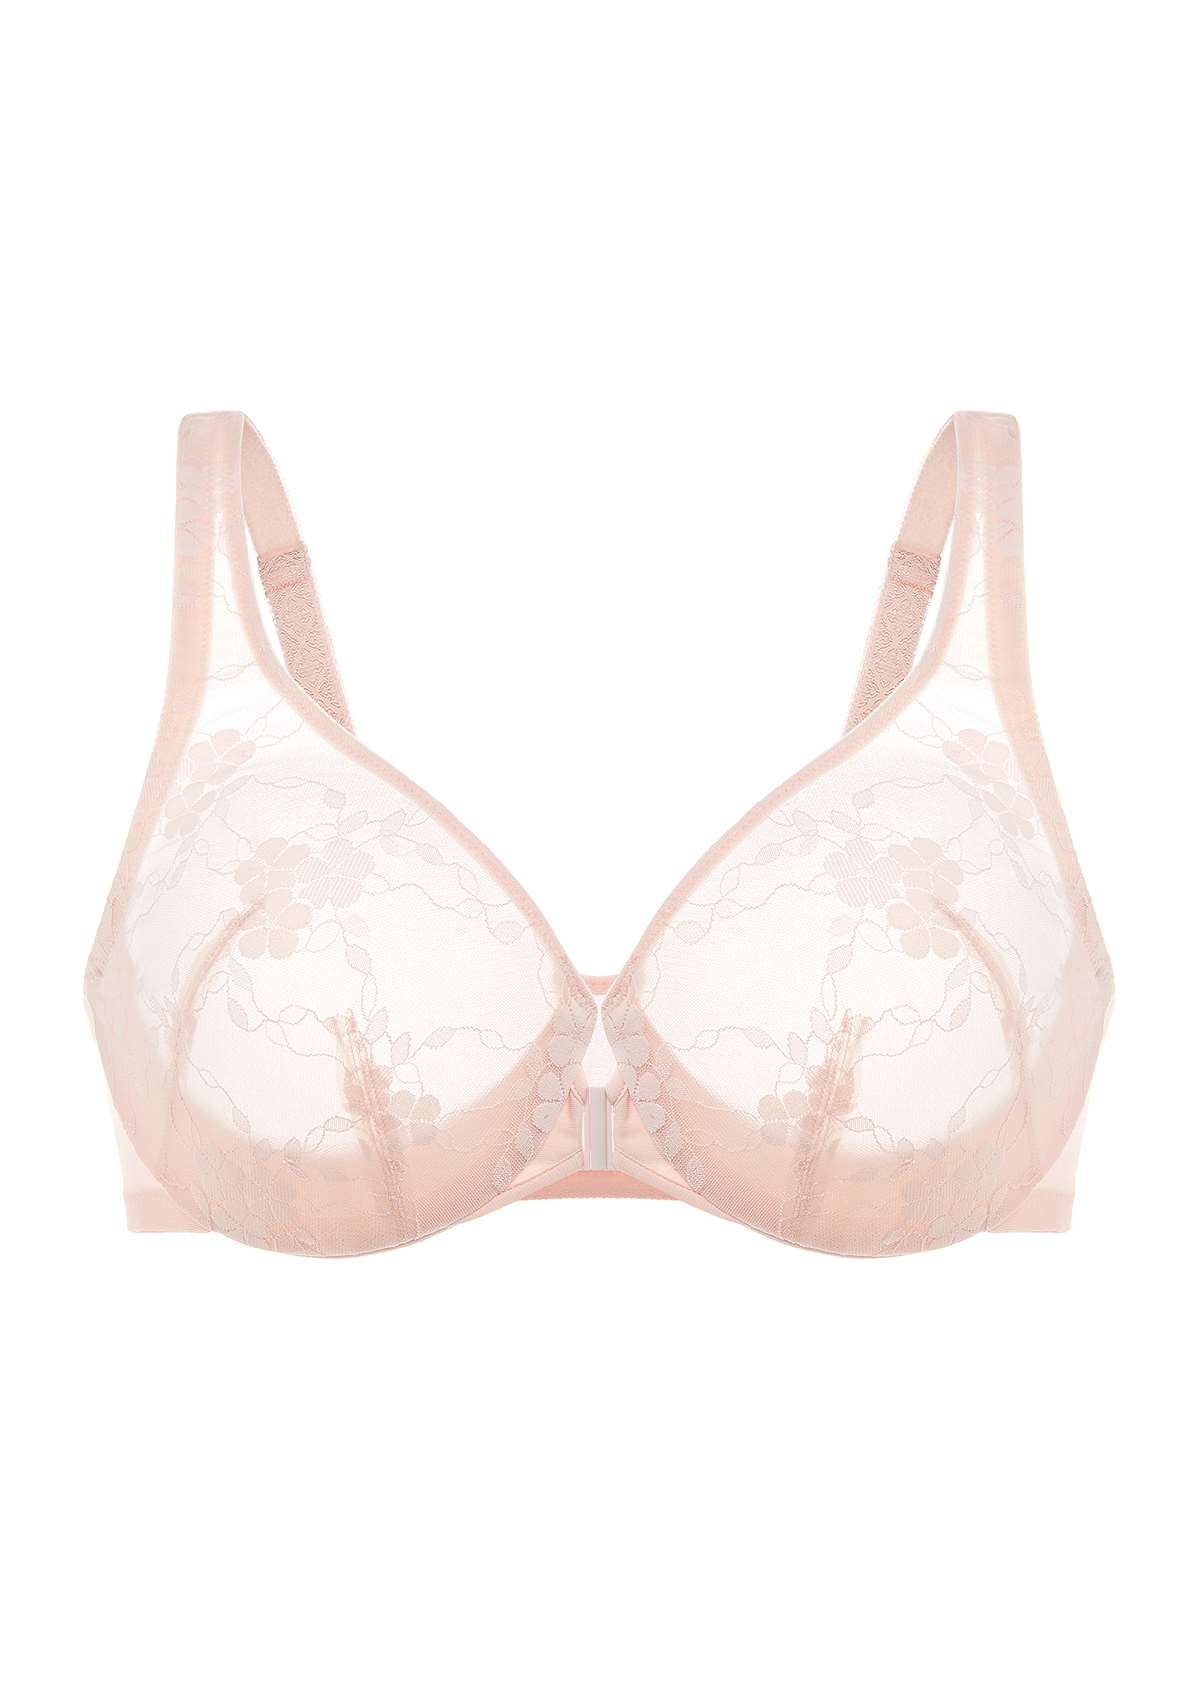 HSIA Spring Romance Front-Close Floral Lace Unlined Full Coverage Bra - Dusty Peach / 34 / DDD/F